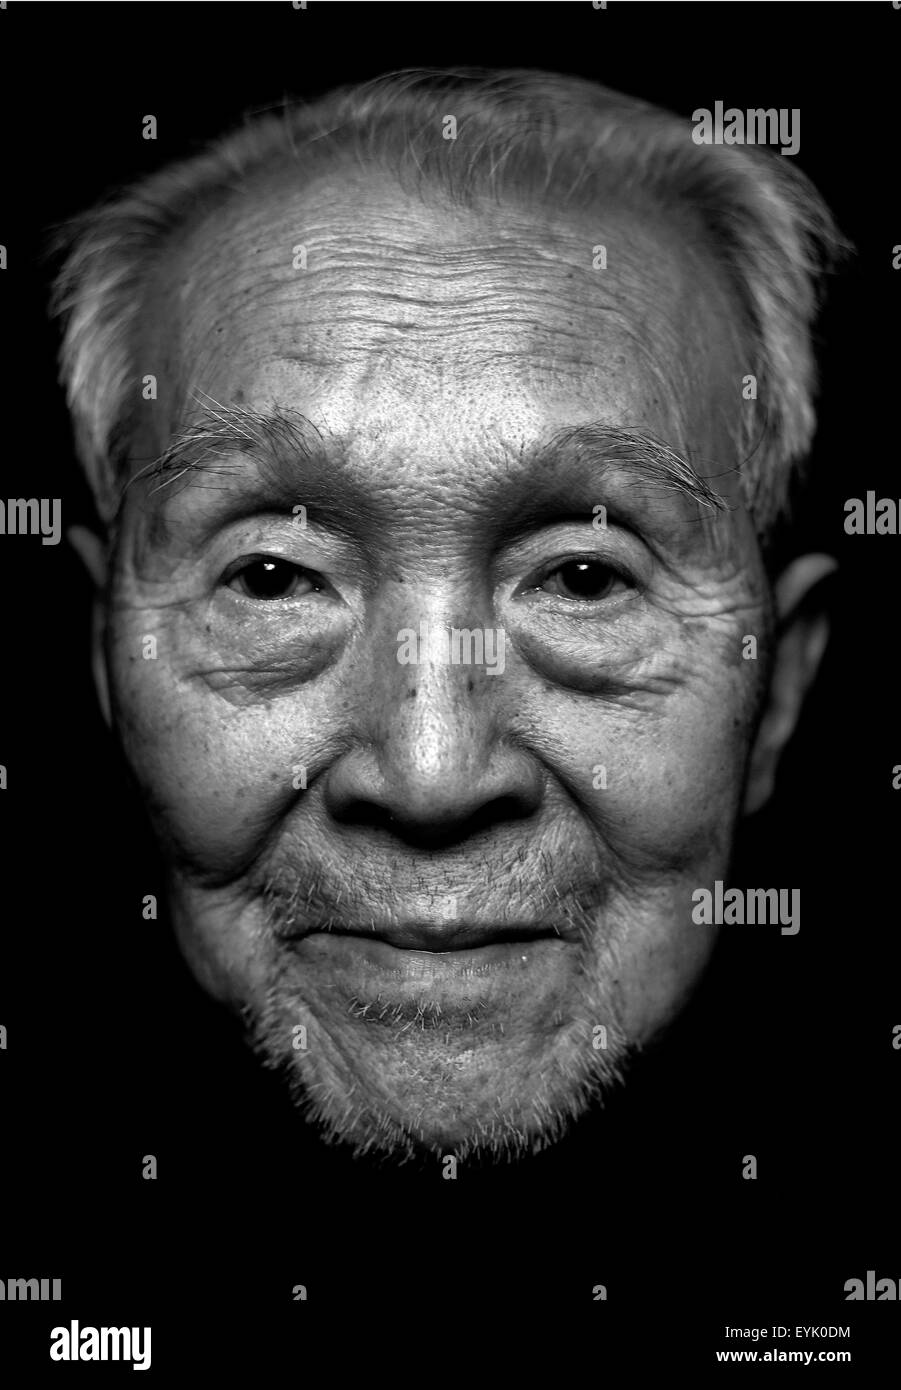 Chn. 27th Aug, 2014. CHINA : (EDITORIAL USE ONLY. CHINA OUT)(MINIMUM PRICE: 100 USD) Zhang Shuqiao: Male, born in 1920 and now lives in Chongqing. He graduated from 7th school (In Xi'an) Huangpu military academy, then allocated to be a platoon commander in Transporting Regiment 1st corp National Revolutional Army and stationed at Huaxian Xi'am. They fought against Japanese army along the river dam across Yuxi to tongguan and Linfen Yuncheng in Shanxi. It's been 70 years since the Second World War ended and Japan surrendered unconditionally on 15 August 1945, but do you know how we earne Stock Photo